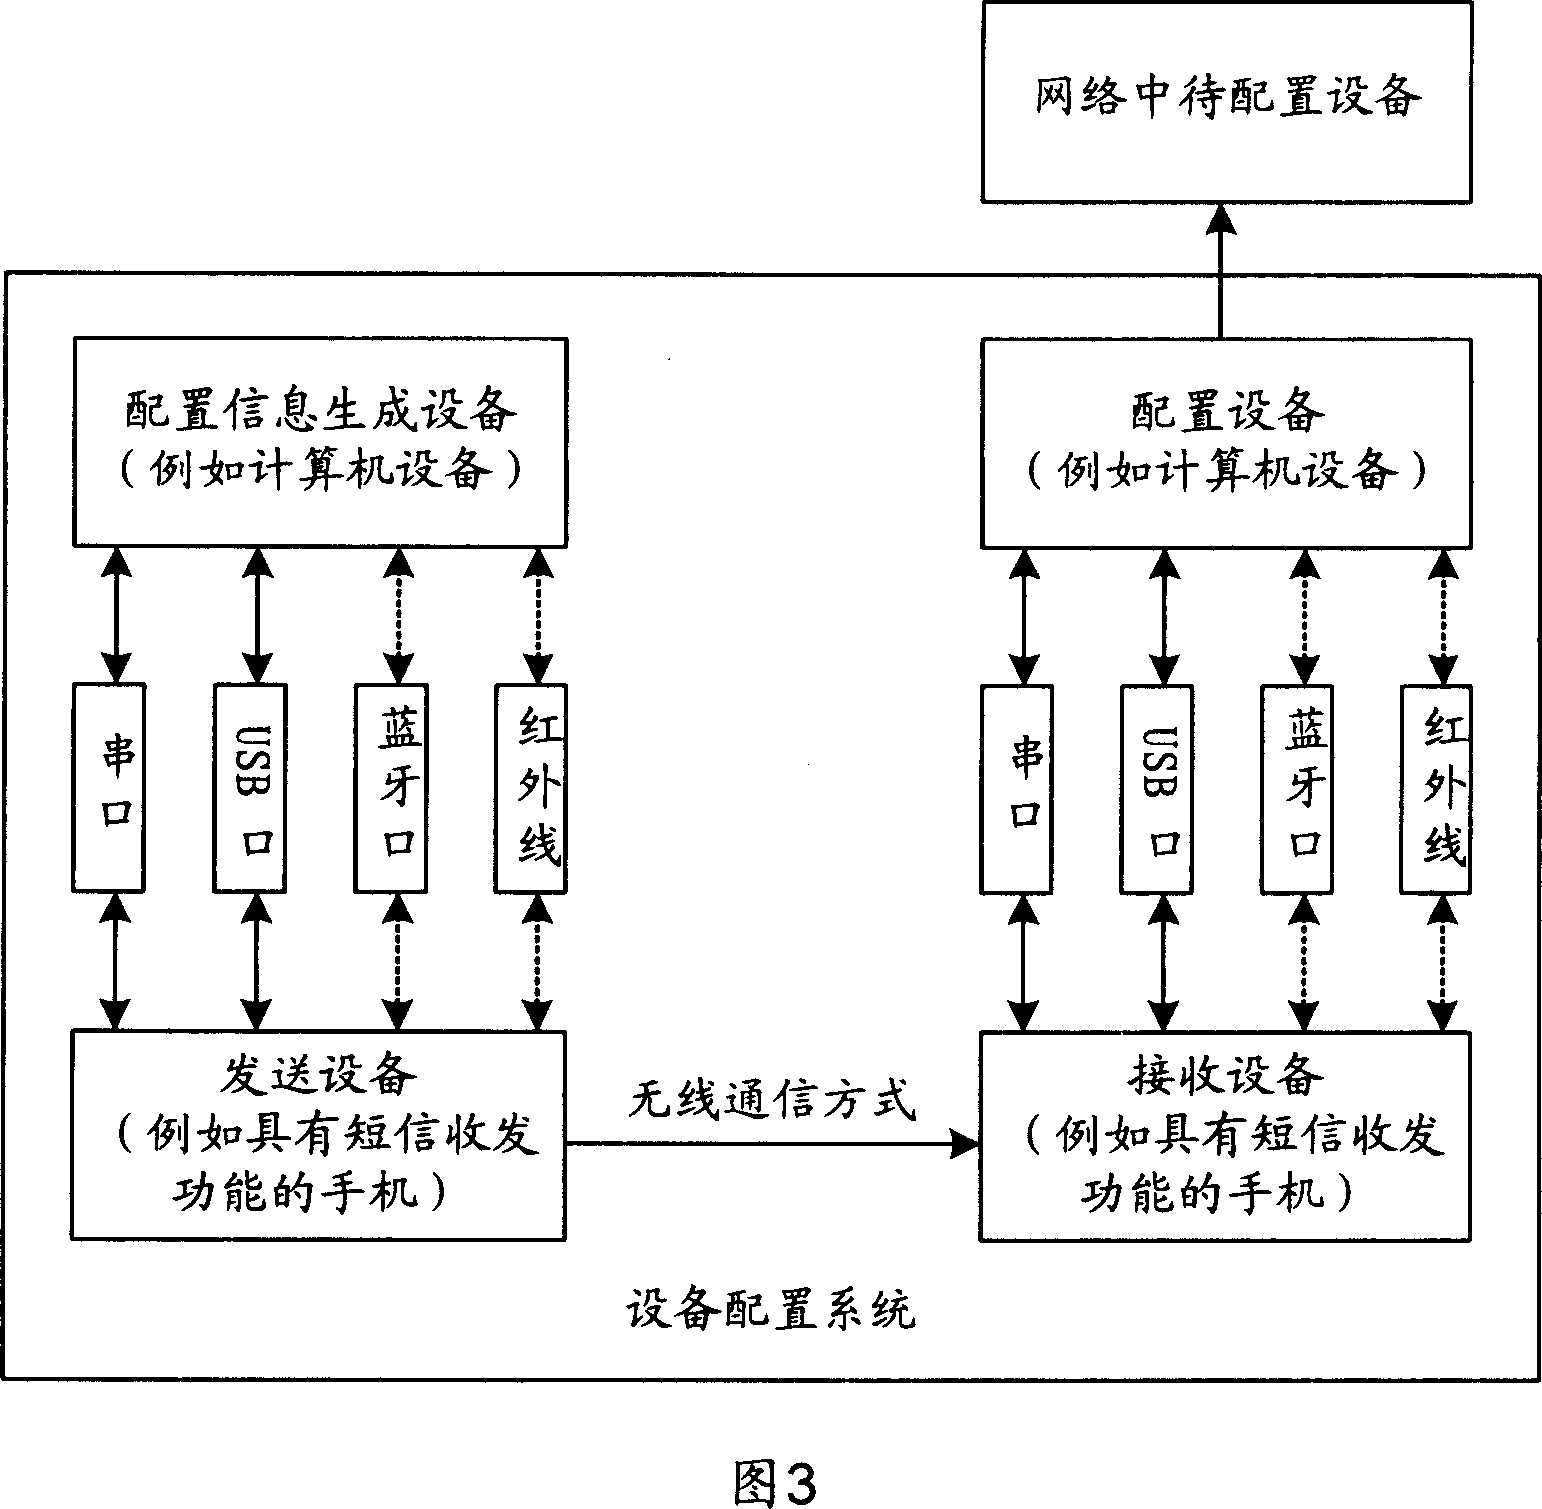 Method and system for equipment configuration